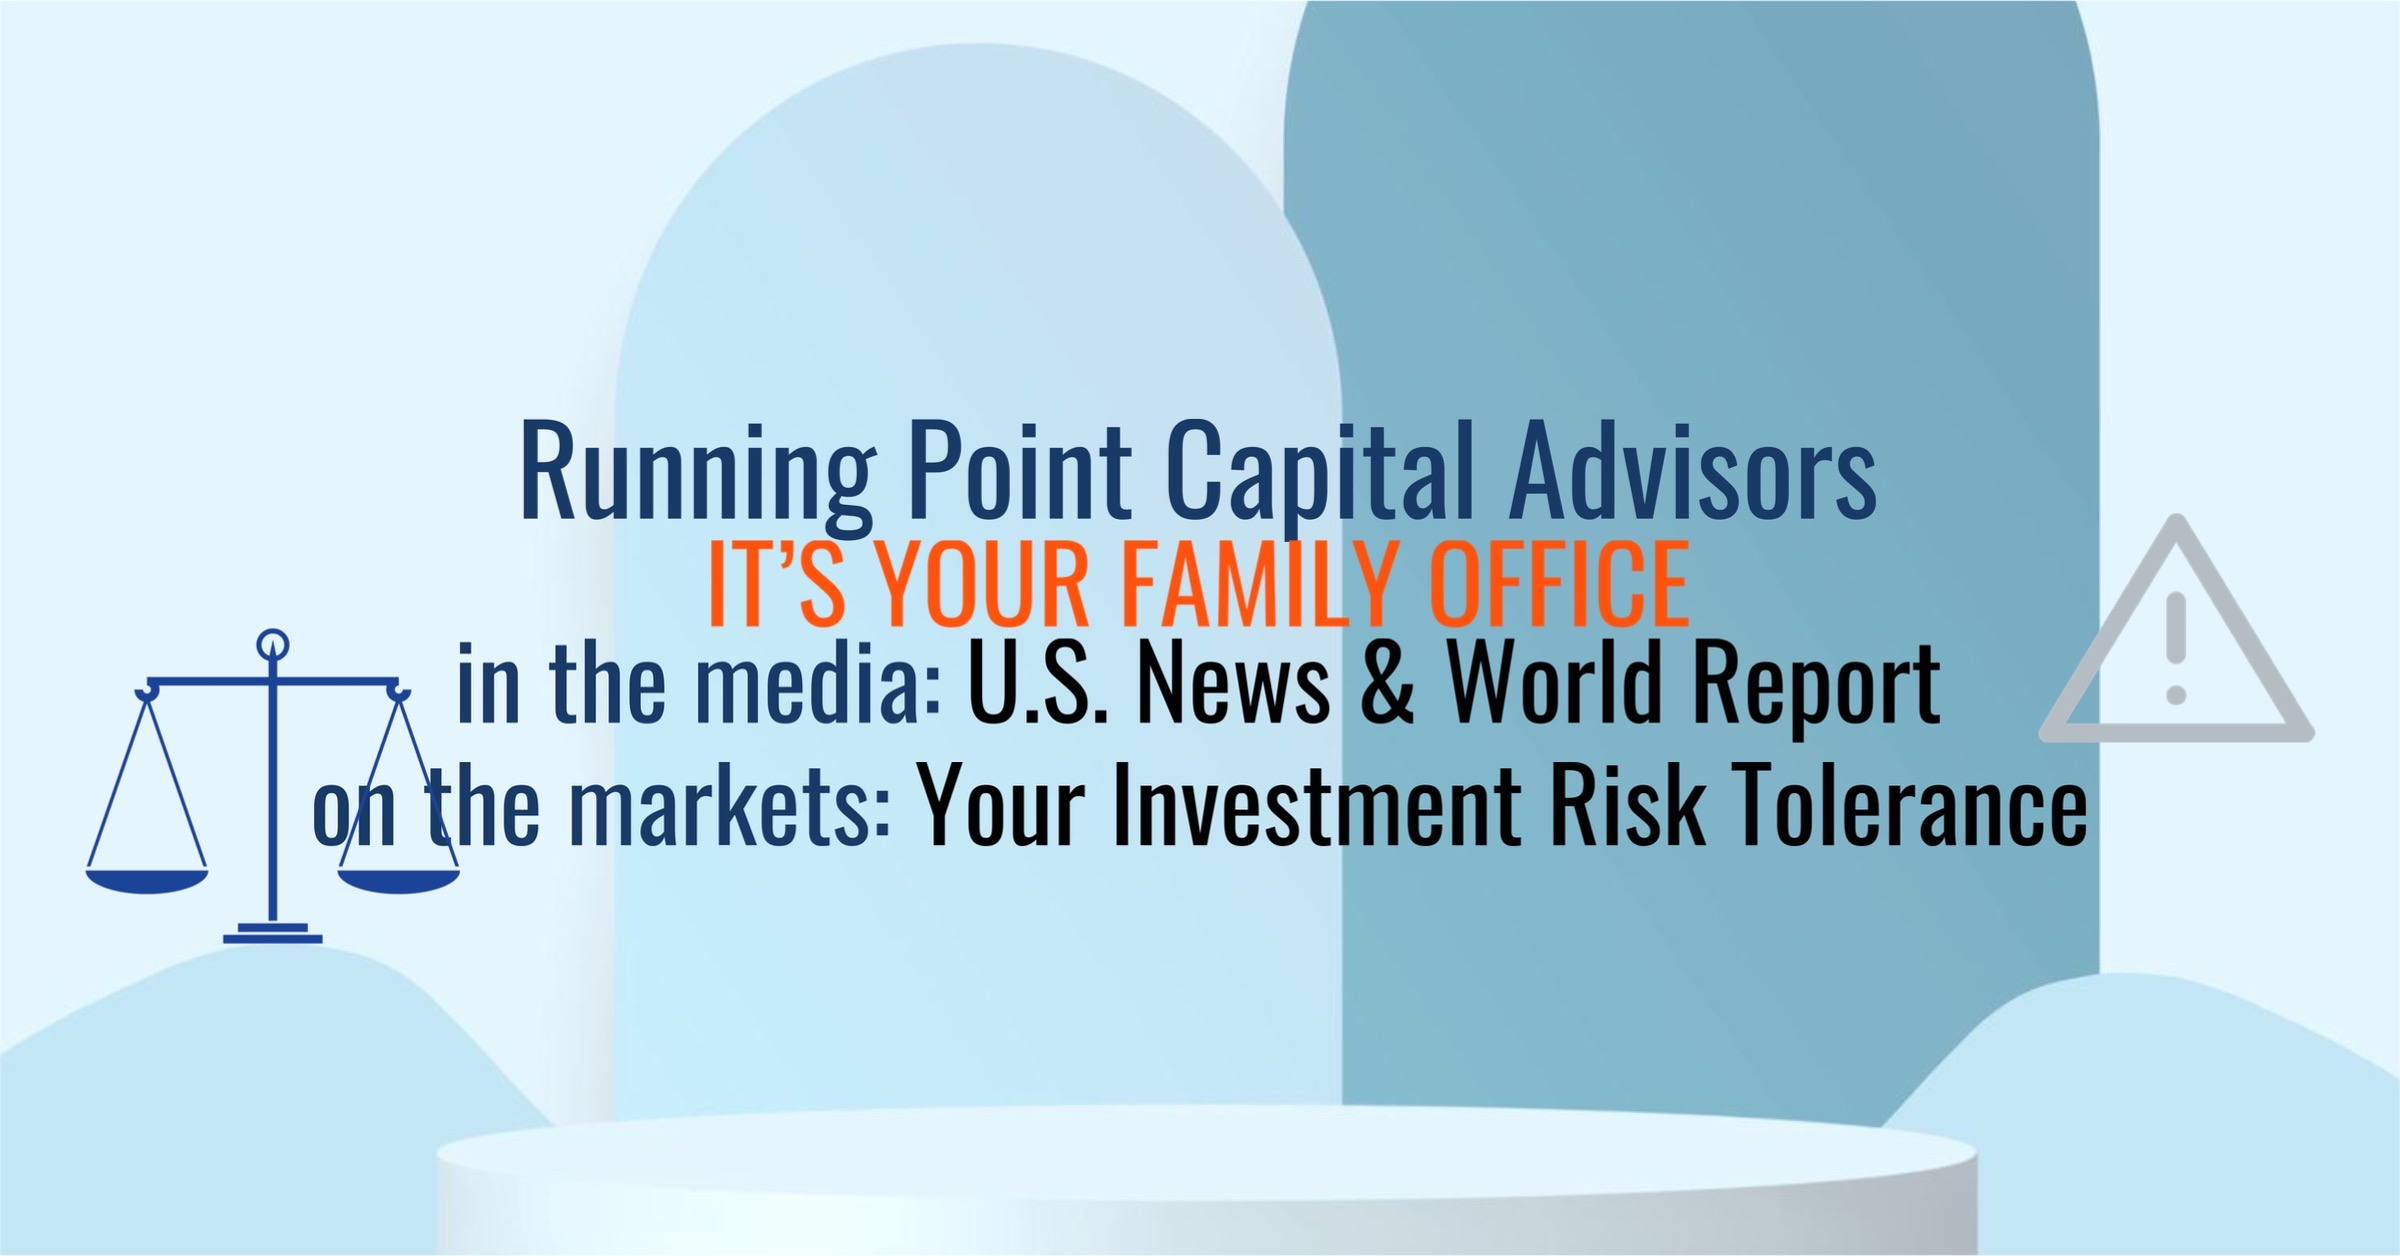 U.S. News & World Report: Your Investment Risk Tolerance